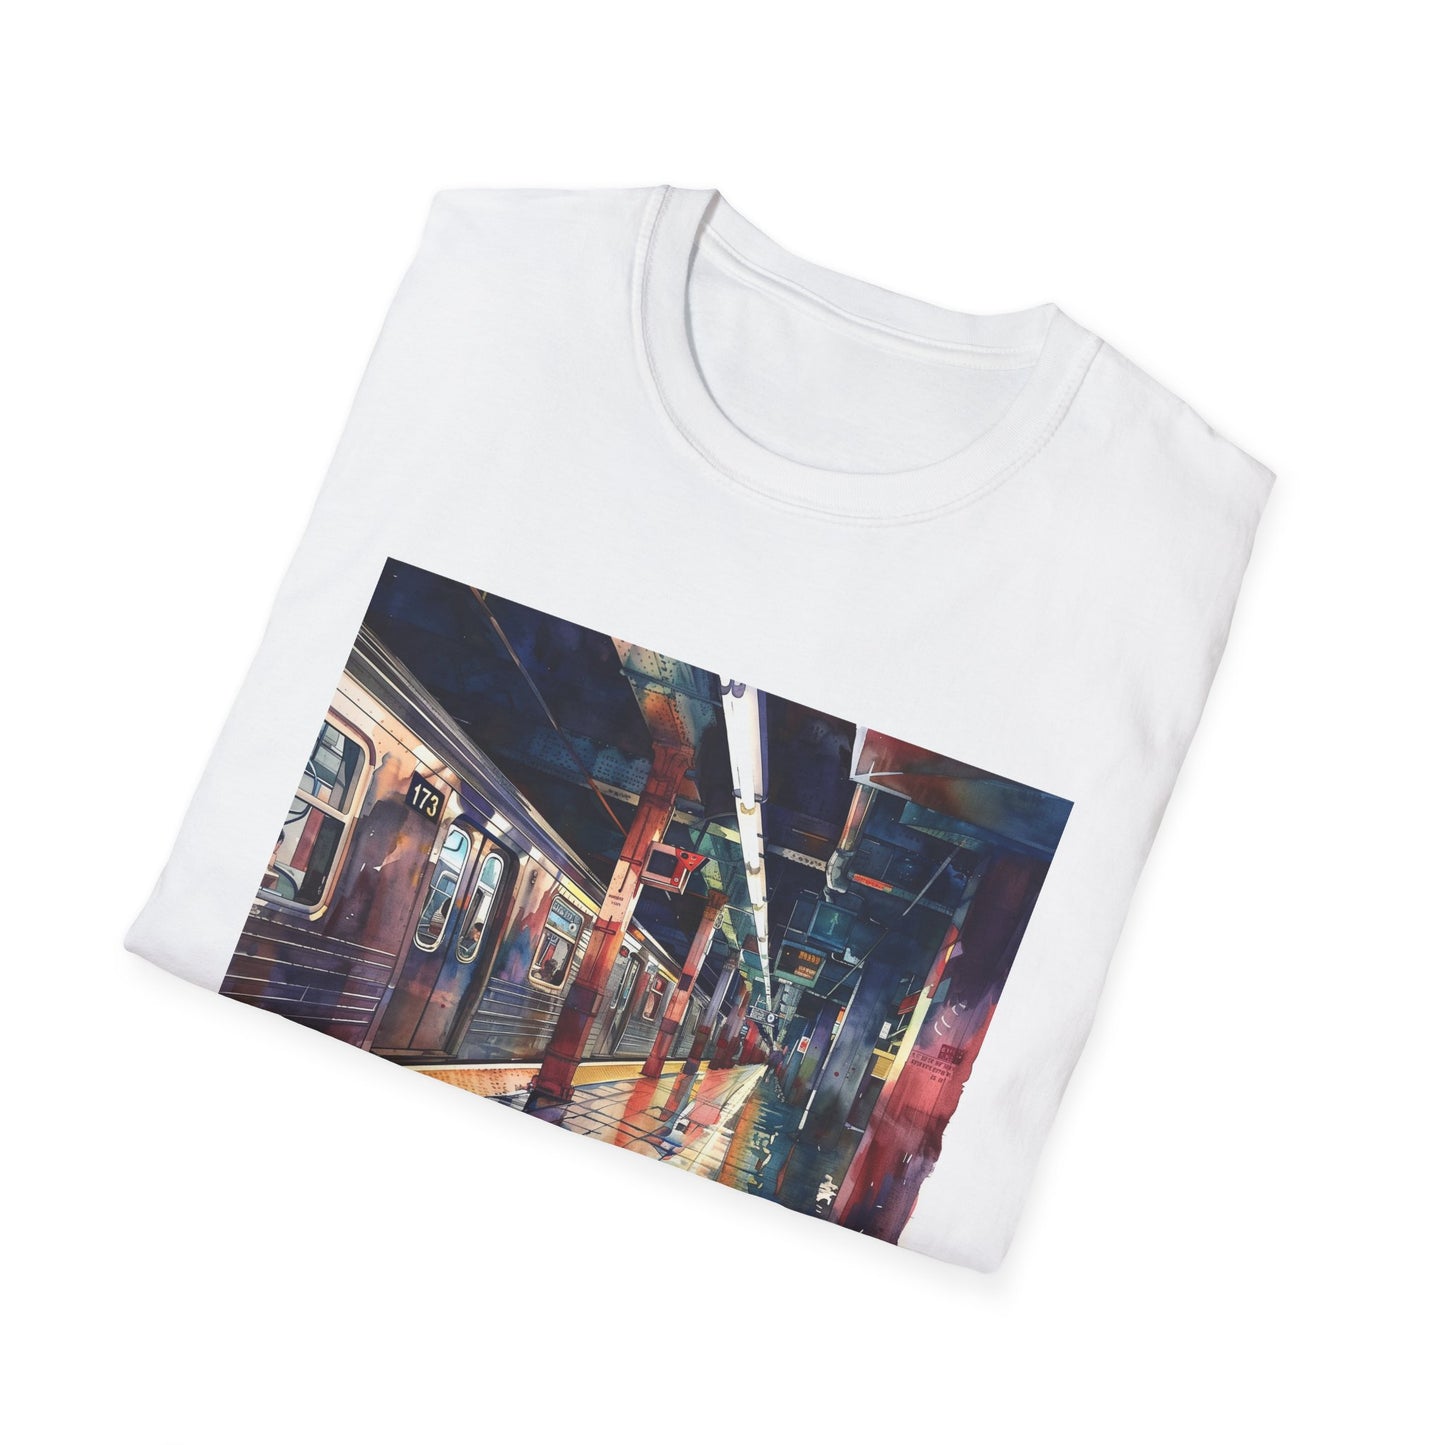 ## The City That Never Sleeps in Watercolor: The New York Subway T-shirt